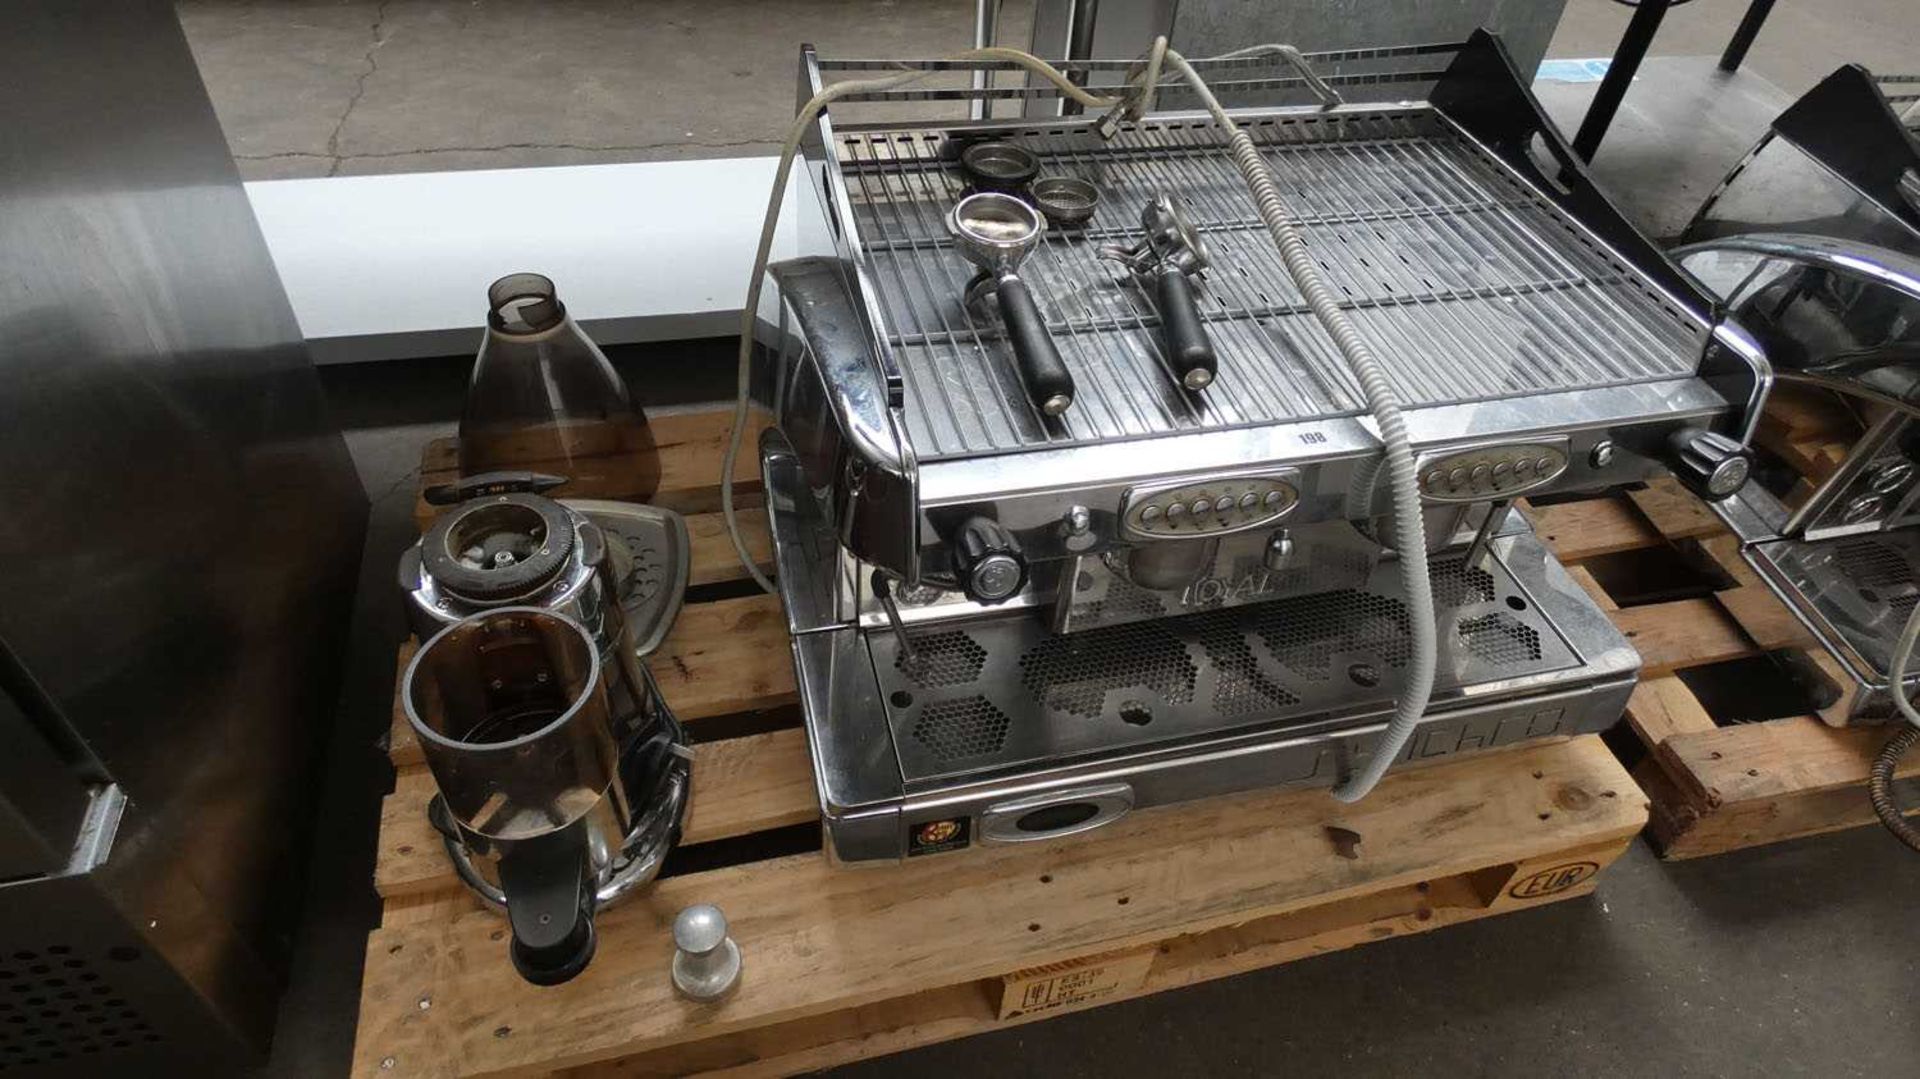 75cm Synchro Royal automatic barista 2 station coffee machine with 2 groupheads and associated